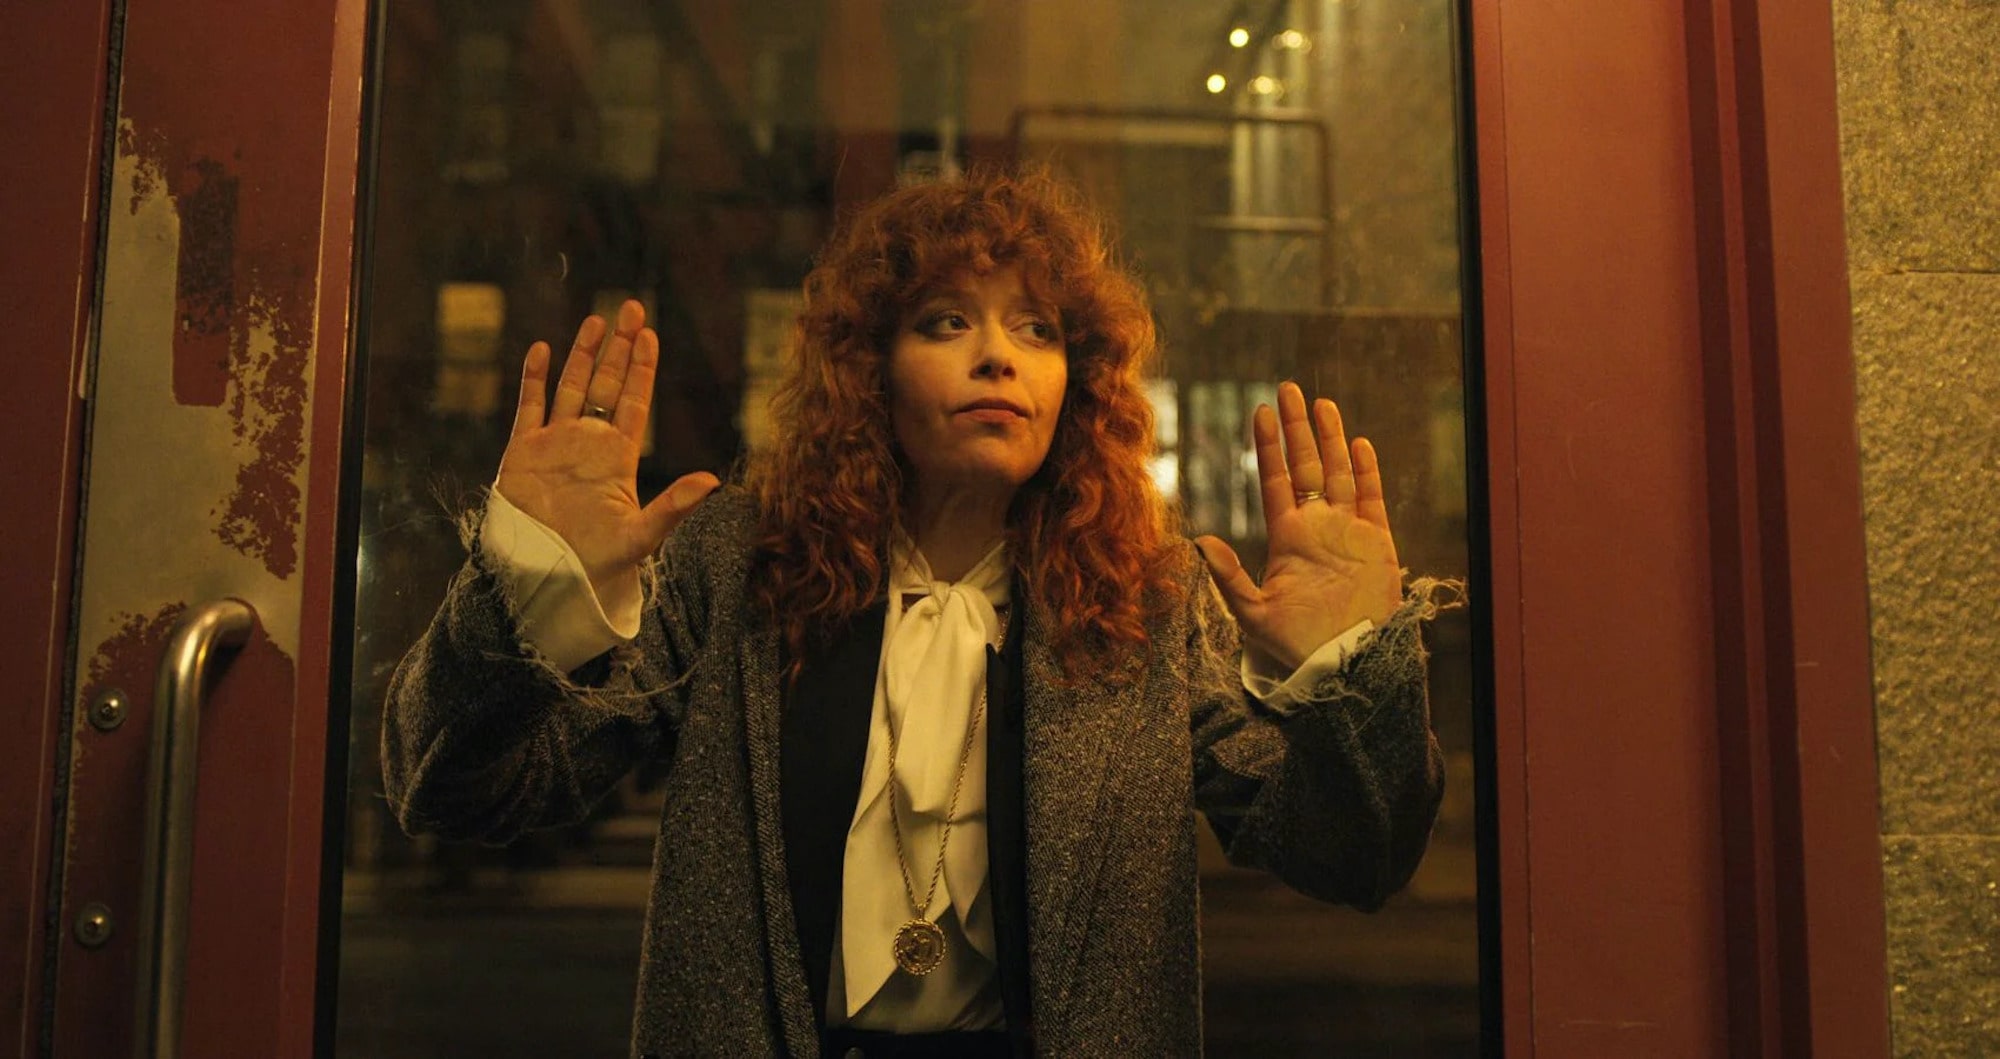 Trippy teaser: Find out how to watch ‘Russian Doll’ season 2 for free